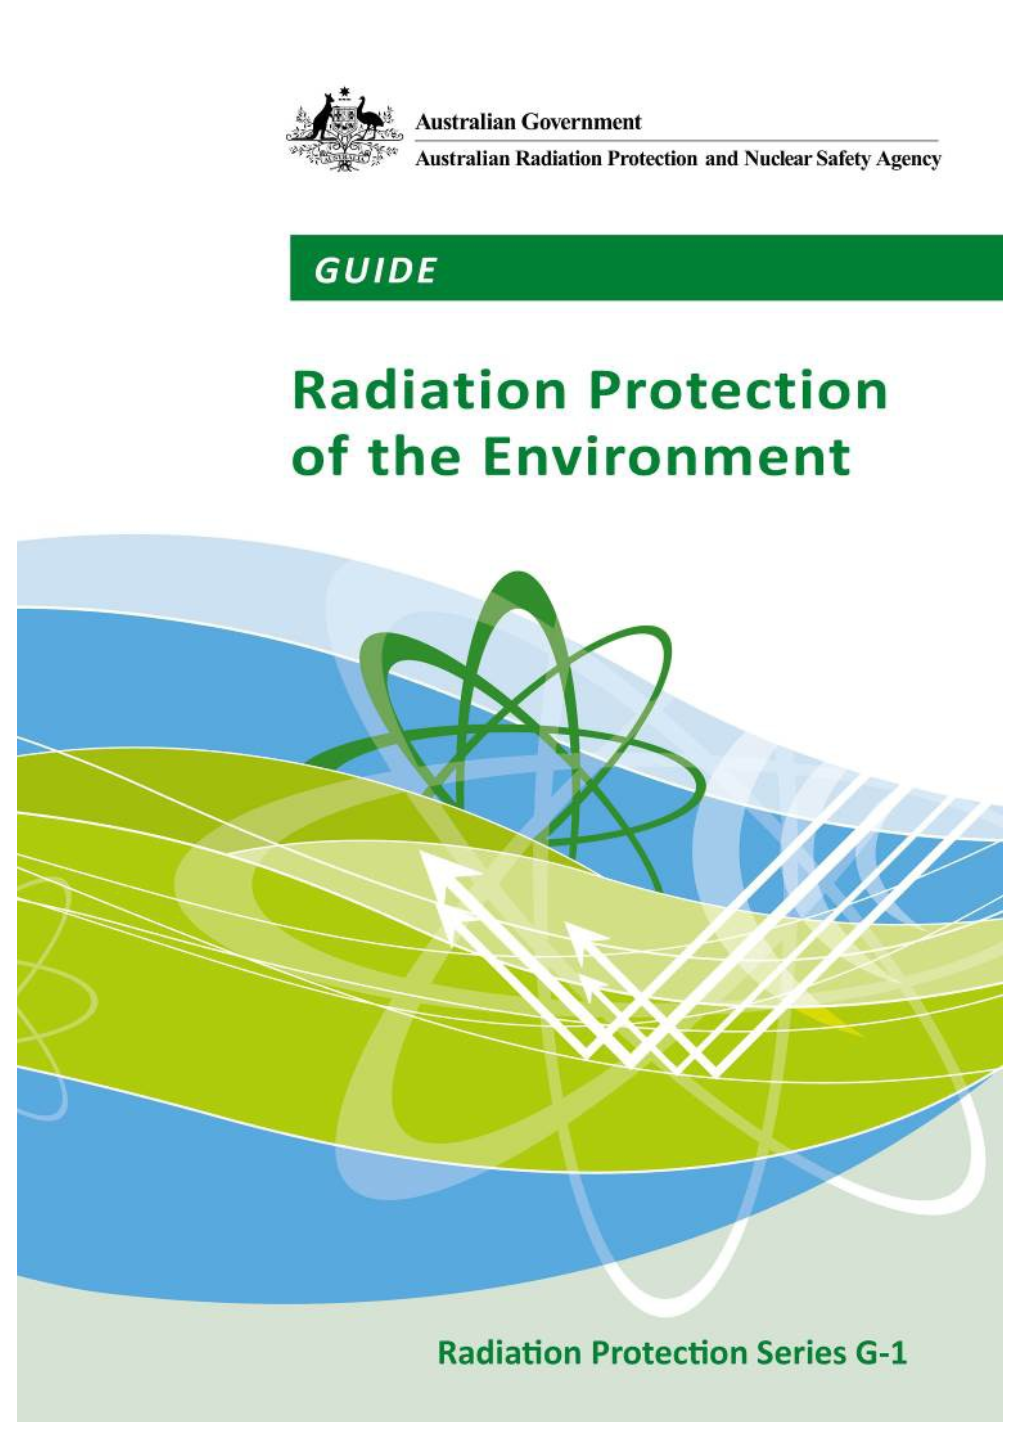 Guide for Radiation Protection of the Environment (RPS G-1)